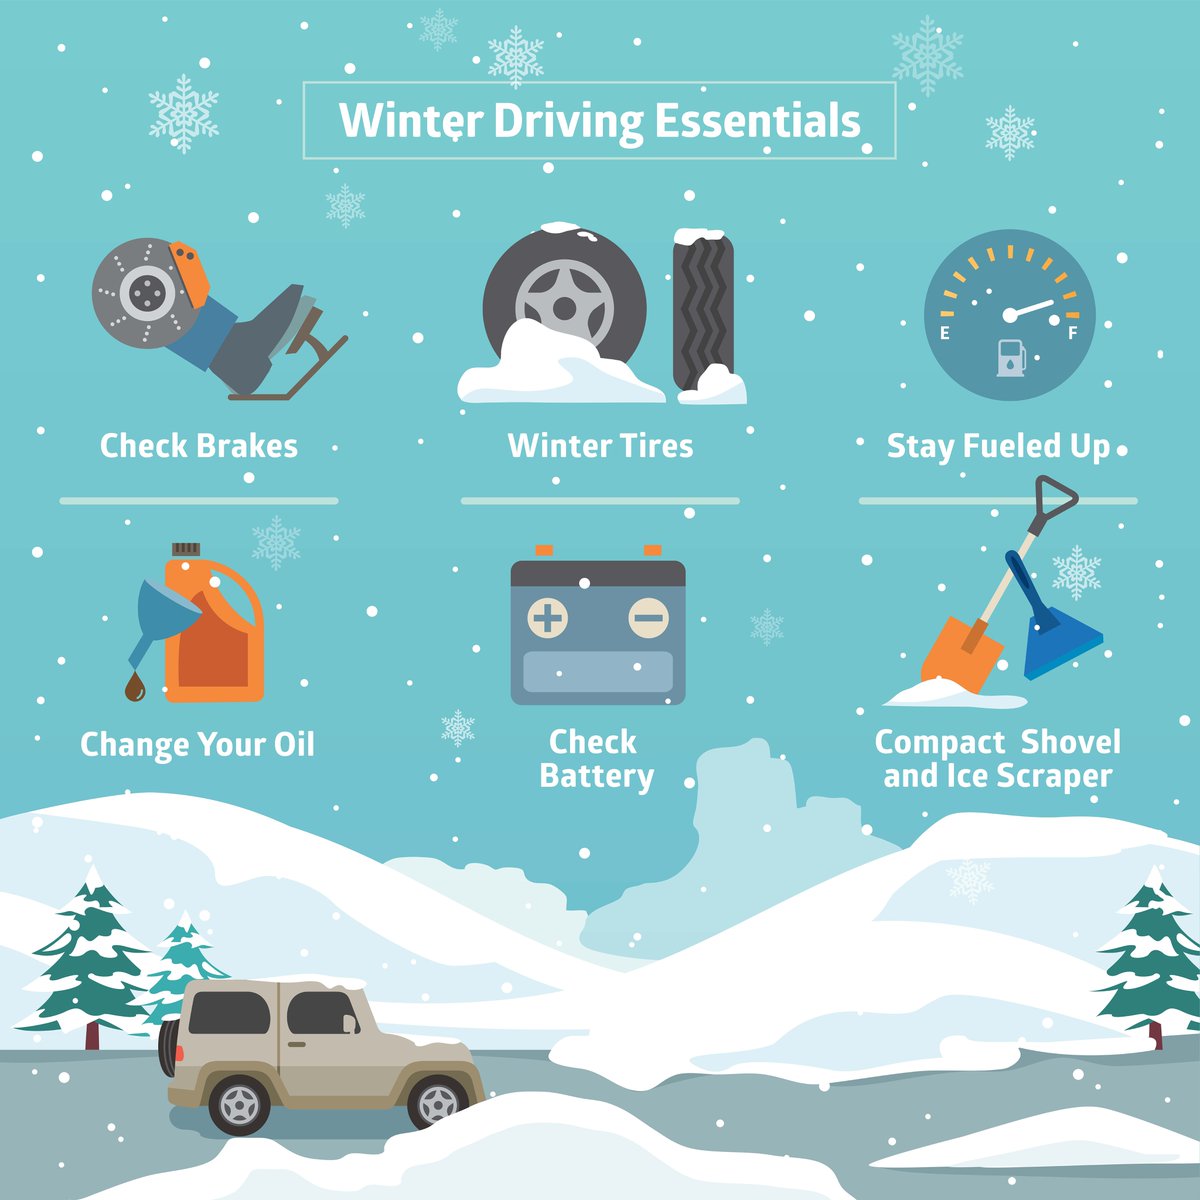 It's going to be a cold Christmas weekend in MD. If you're traveling, be prepared as extreme cold can present hazards. If you are stuck in a traffic jam or your car becomes disabled: • Stay with the vehicle • Run your engine & heater for short intervals